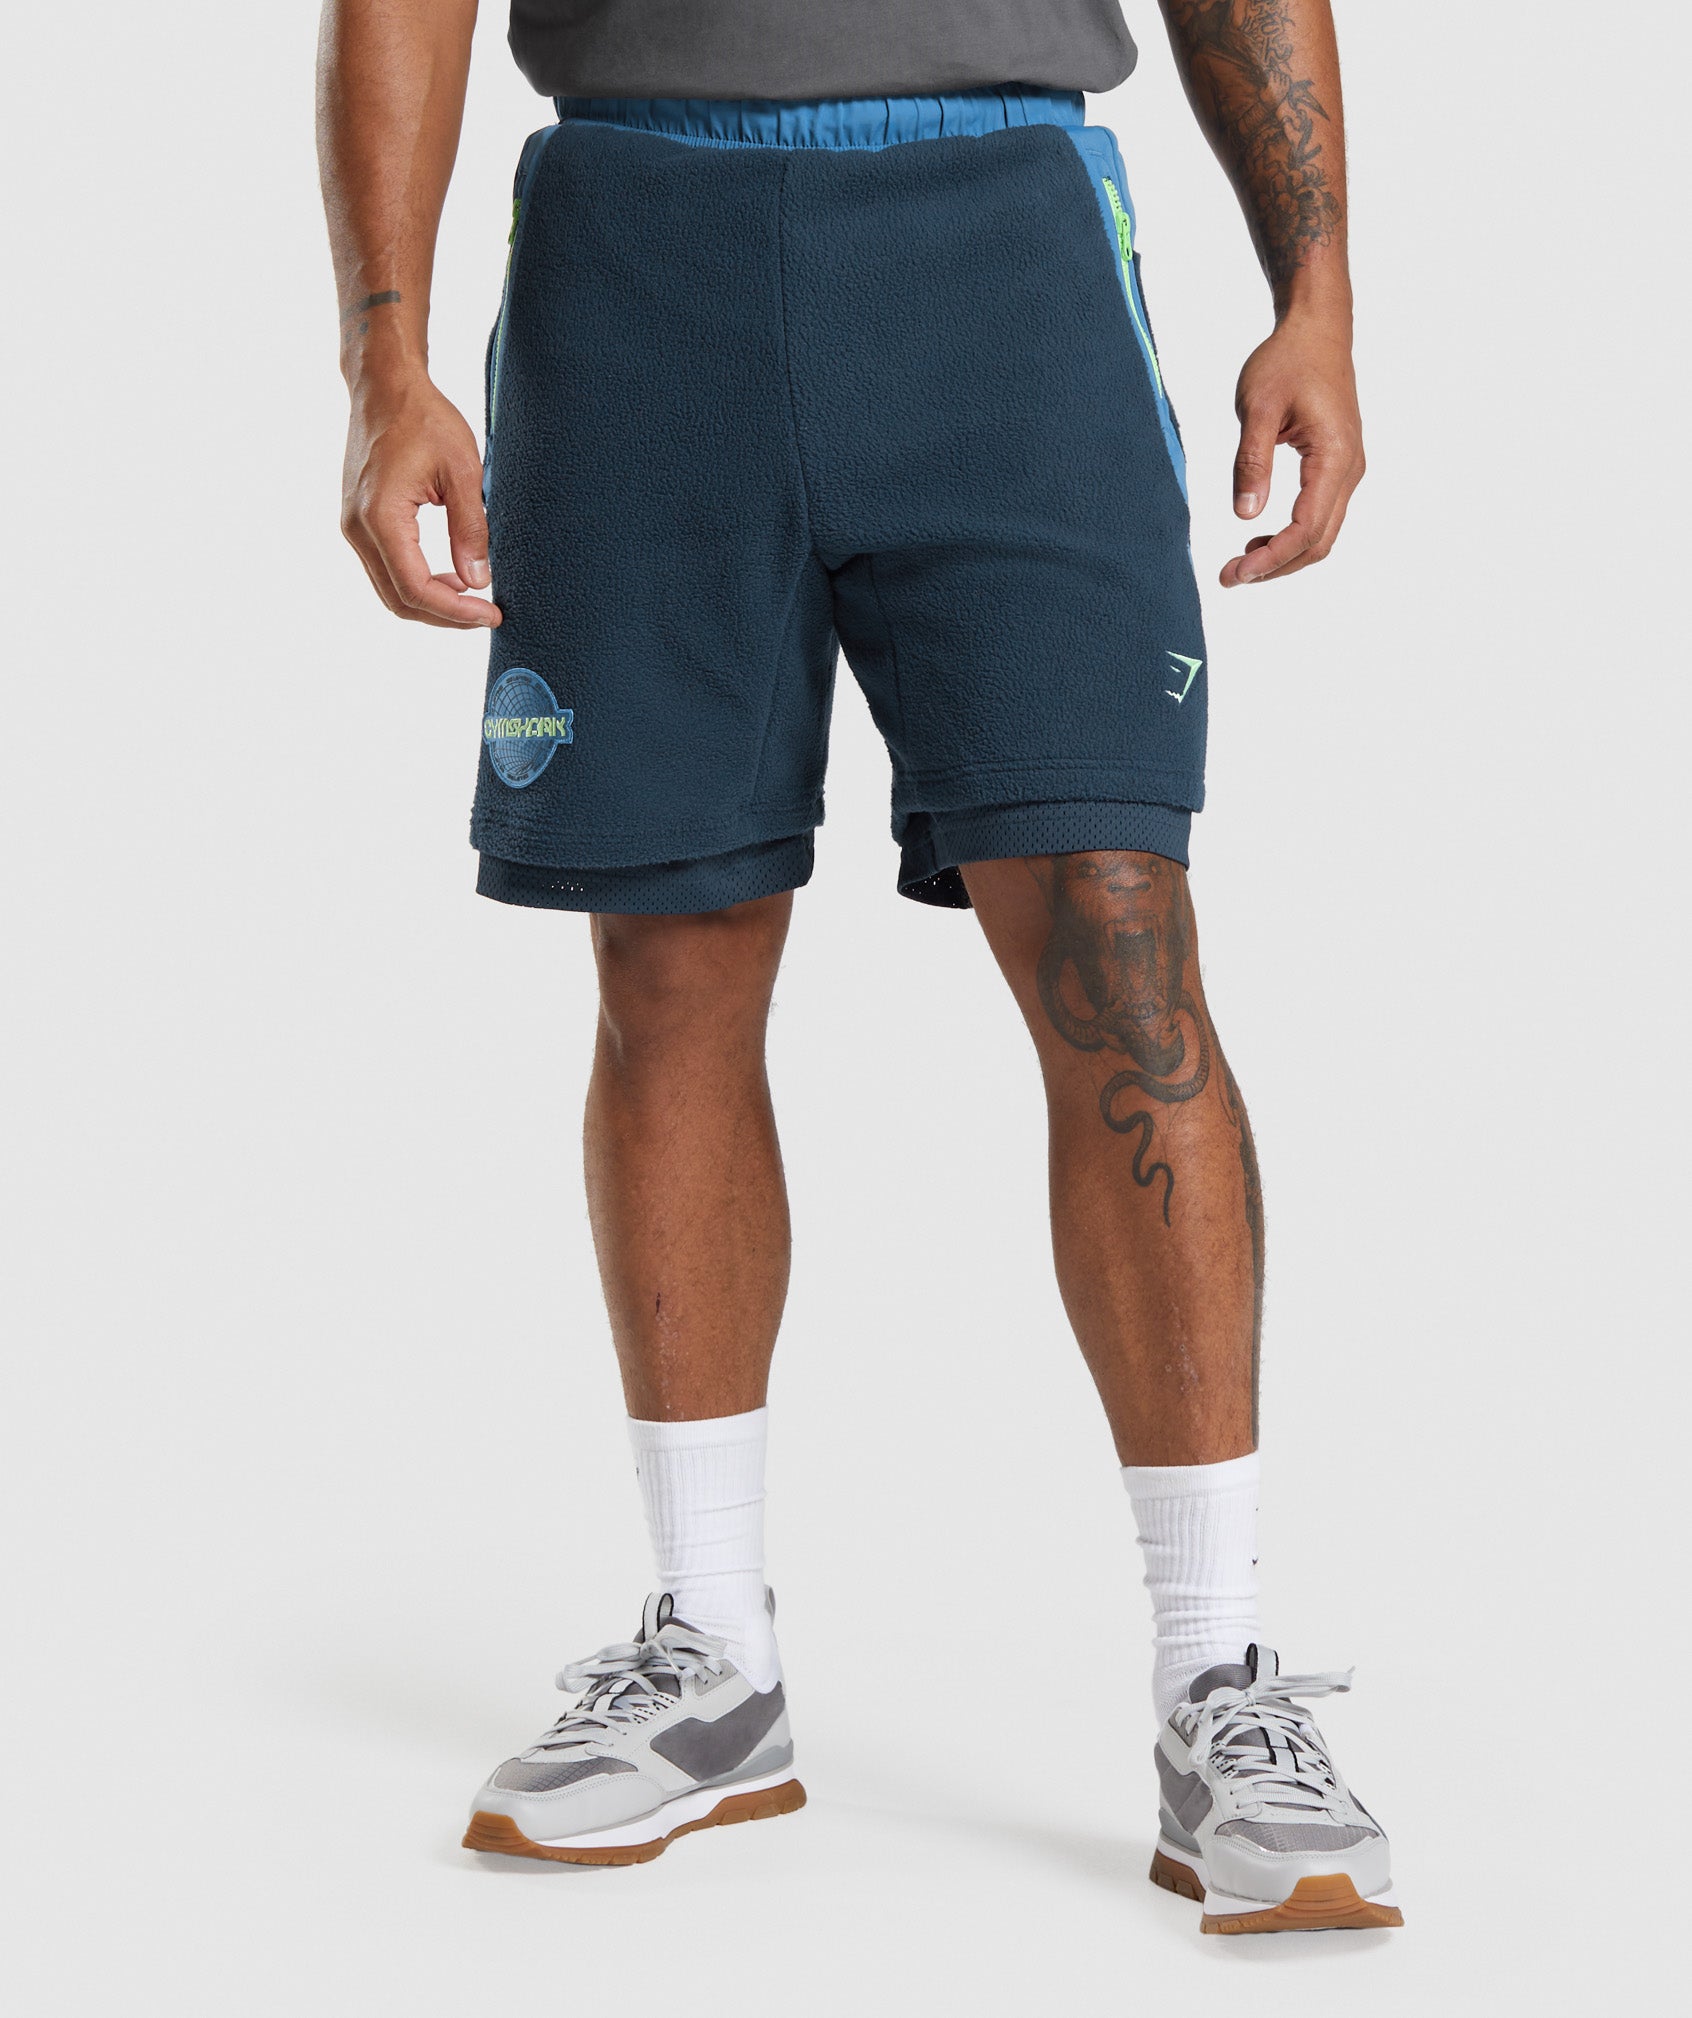 Vibes Shorts in Navy/Lakeside Blue